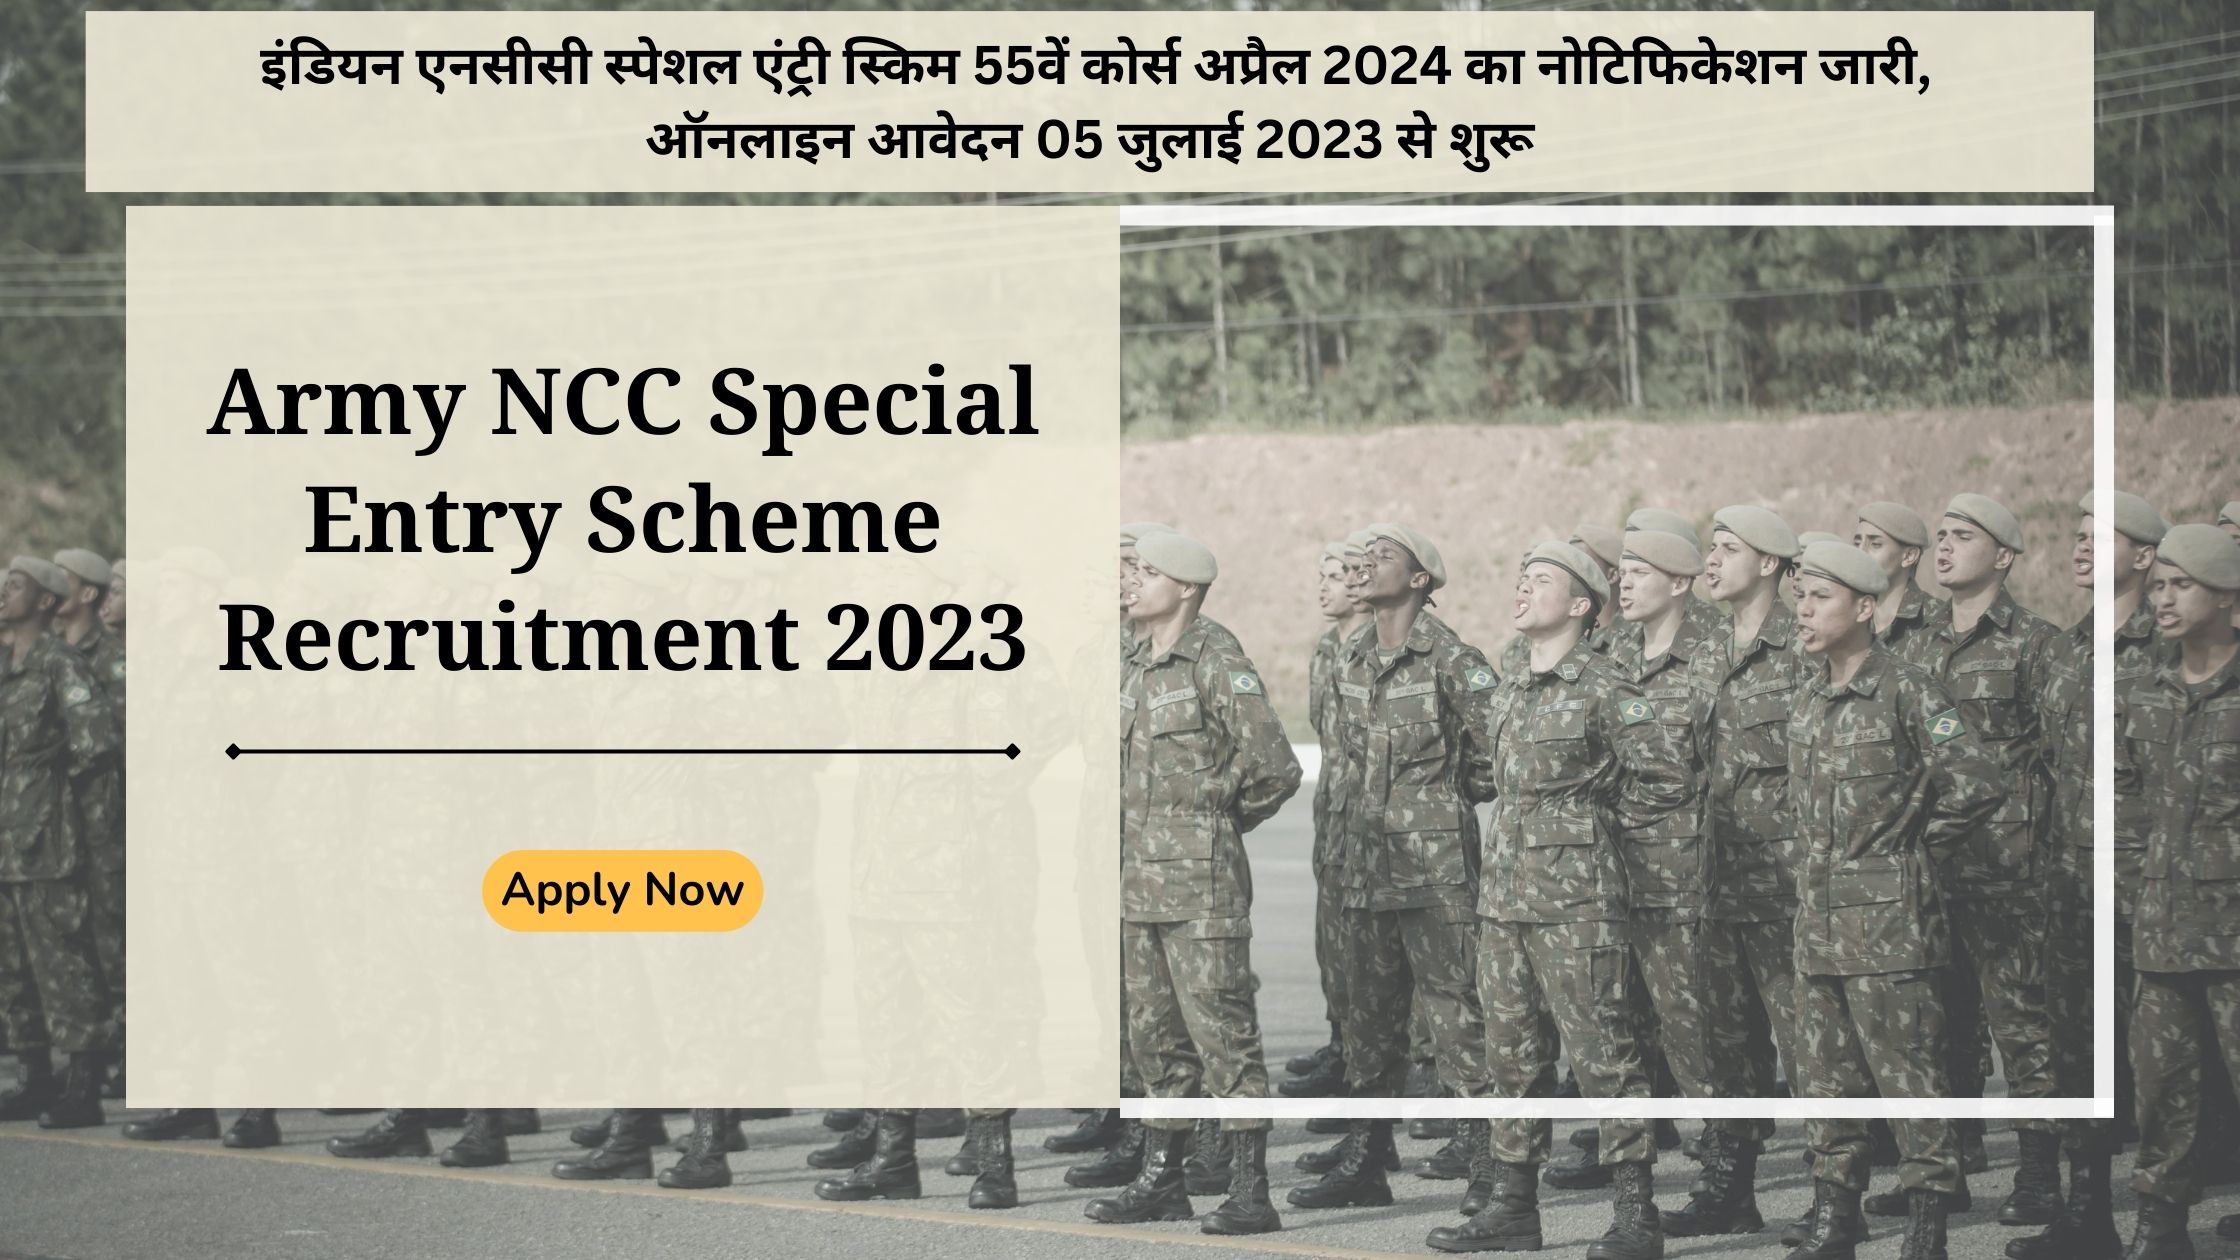 Army NCC Special Entry Scheme Recruitment 2023 Apply Now